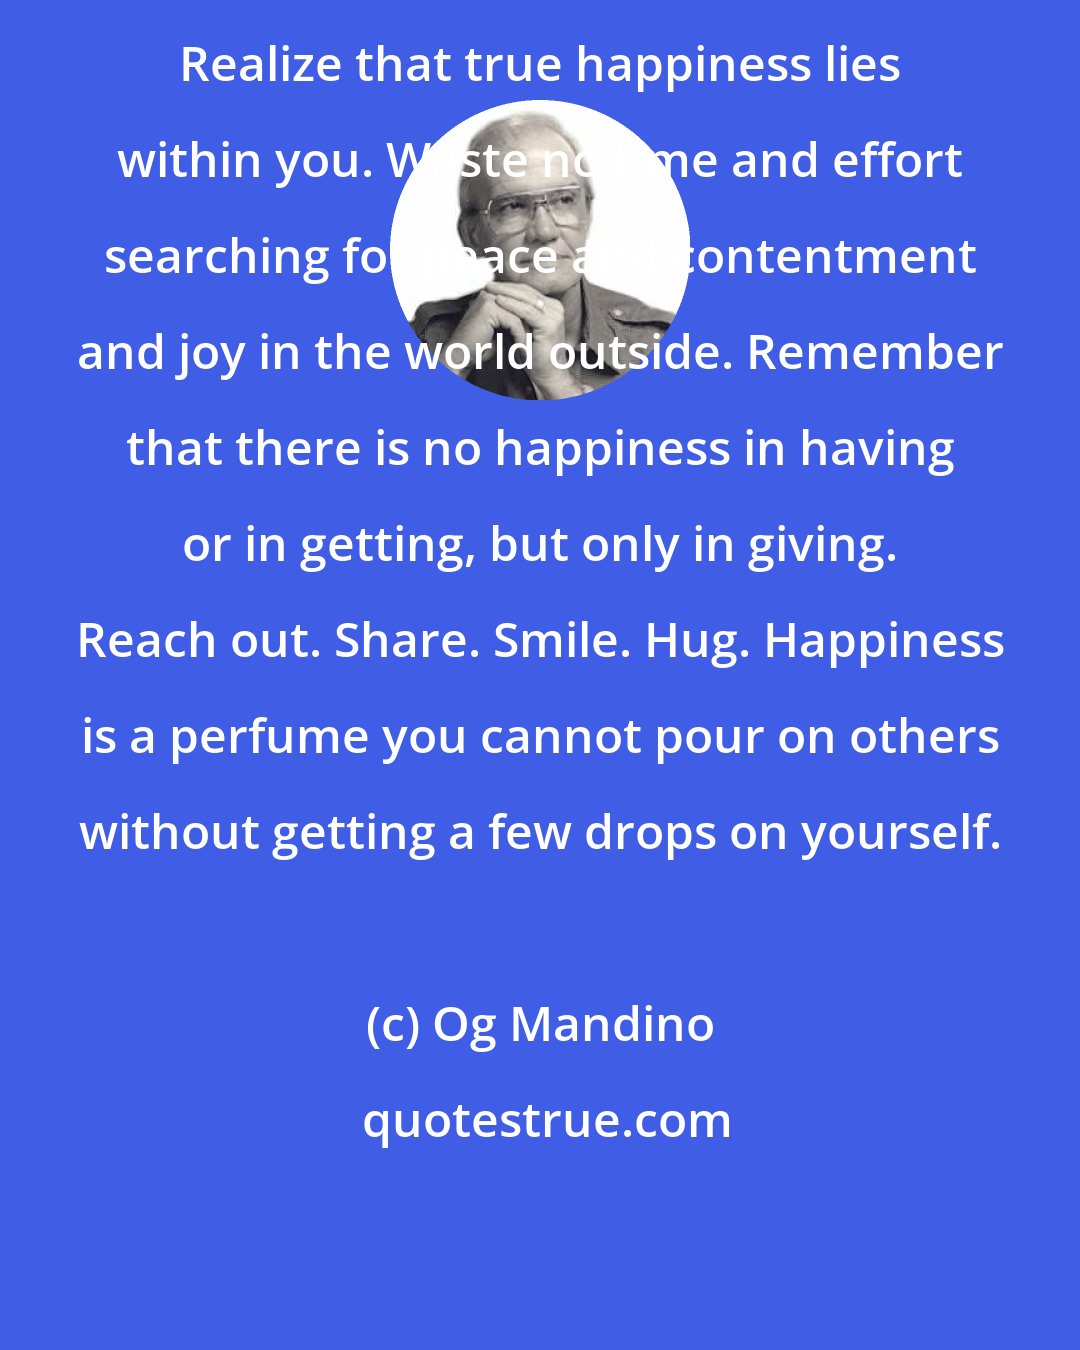 Og Mandino: Realize that true happiness lies within you. Waste no time and effort searching for peace and contentment and joy in the world outside. Remember that there is no happiness in having or in getting, but only in giving. Reach out. Share. Smile. Hug. Happiness is a perfume you cannot pour on others without getting a few drops on yourself.